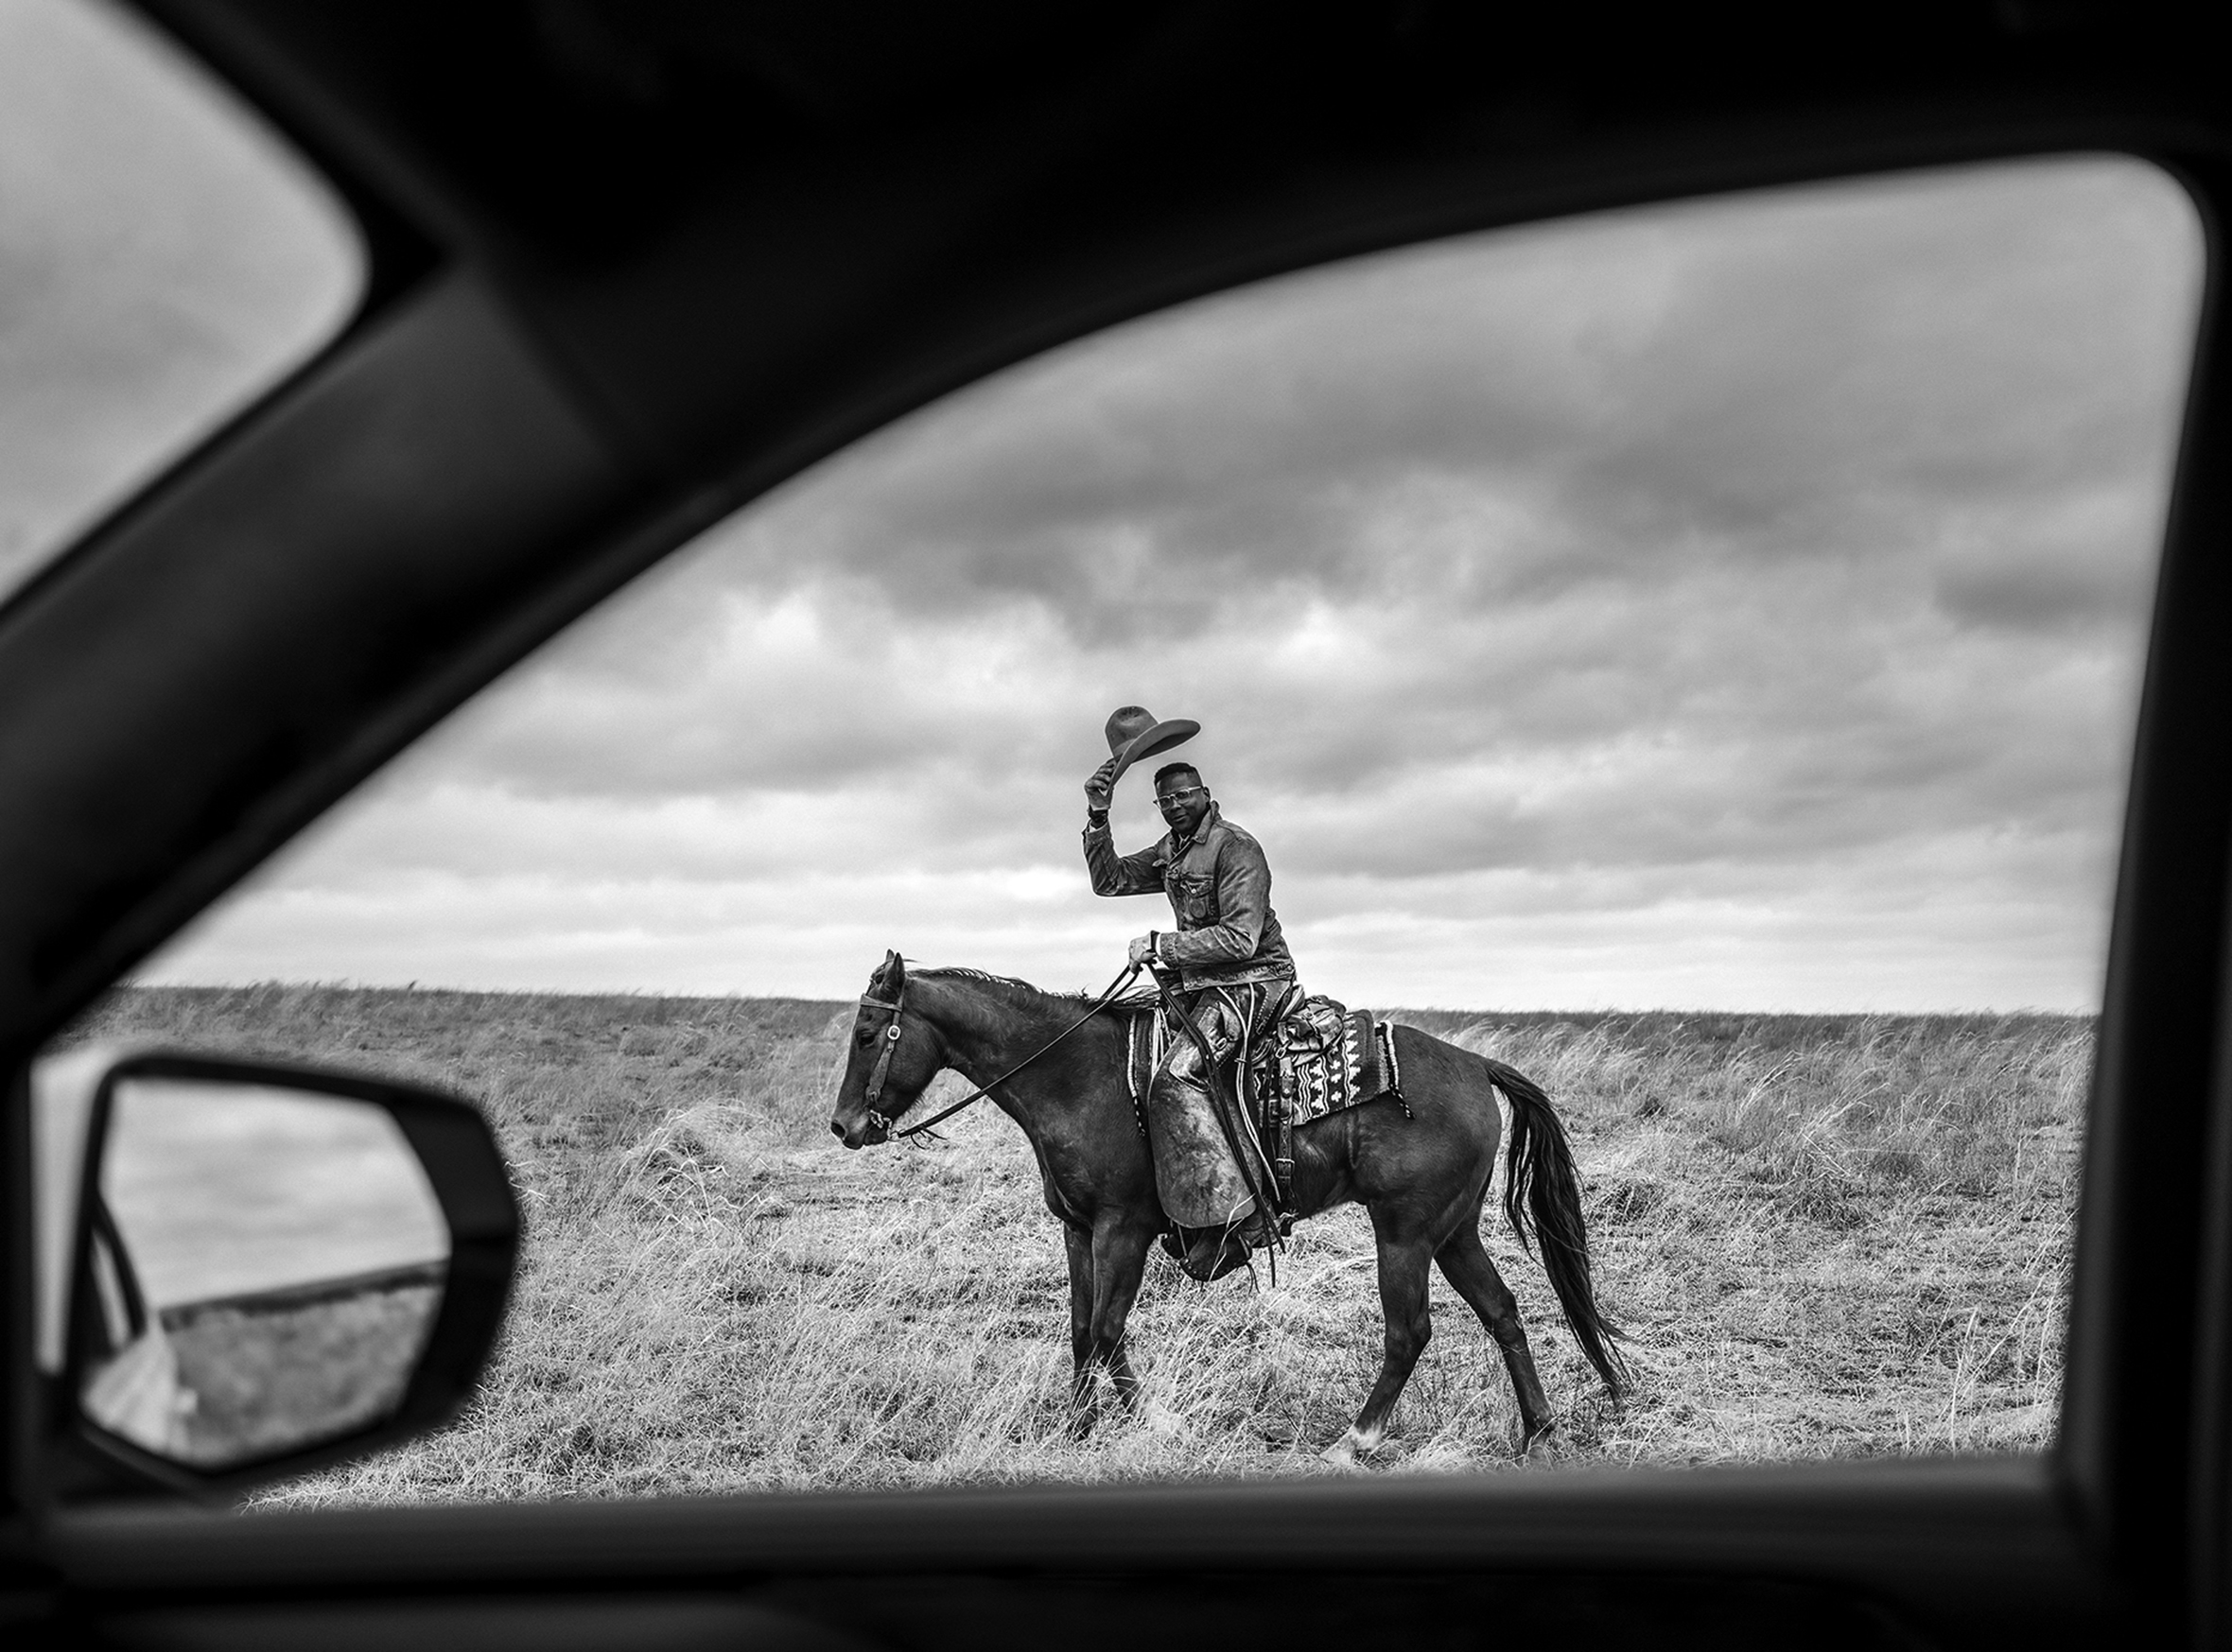 A Black cowboy on his horse. He’s tipping his hat to the person holding the camera. The image is framed by a car interior.